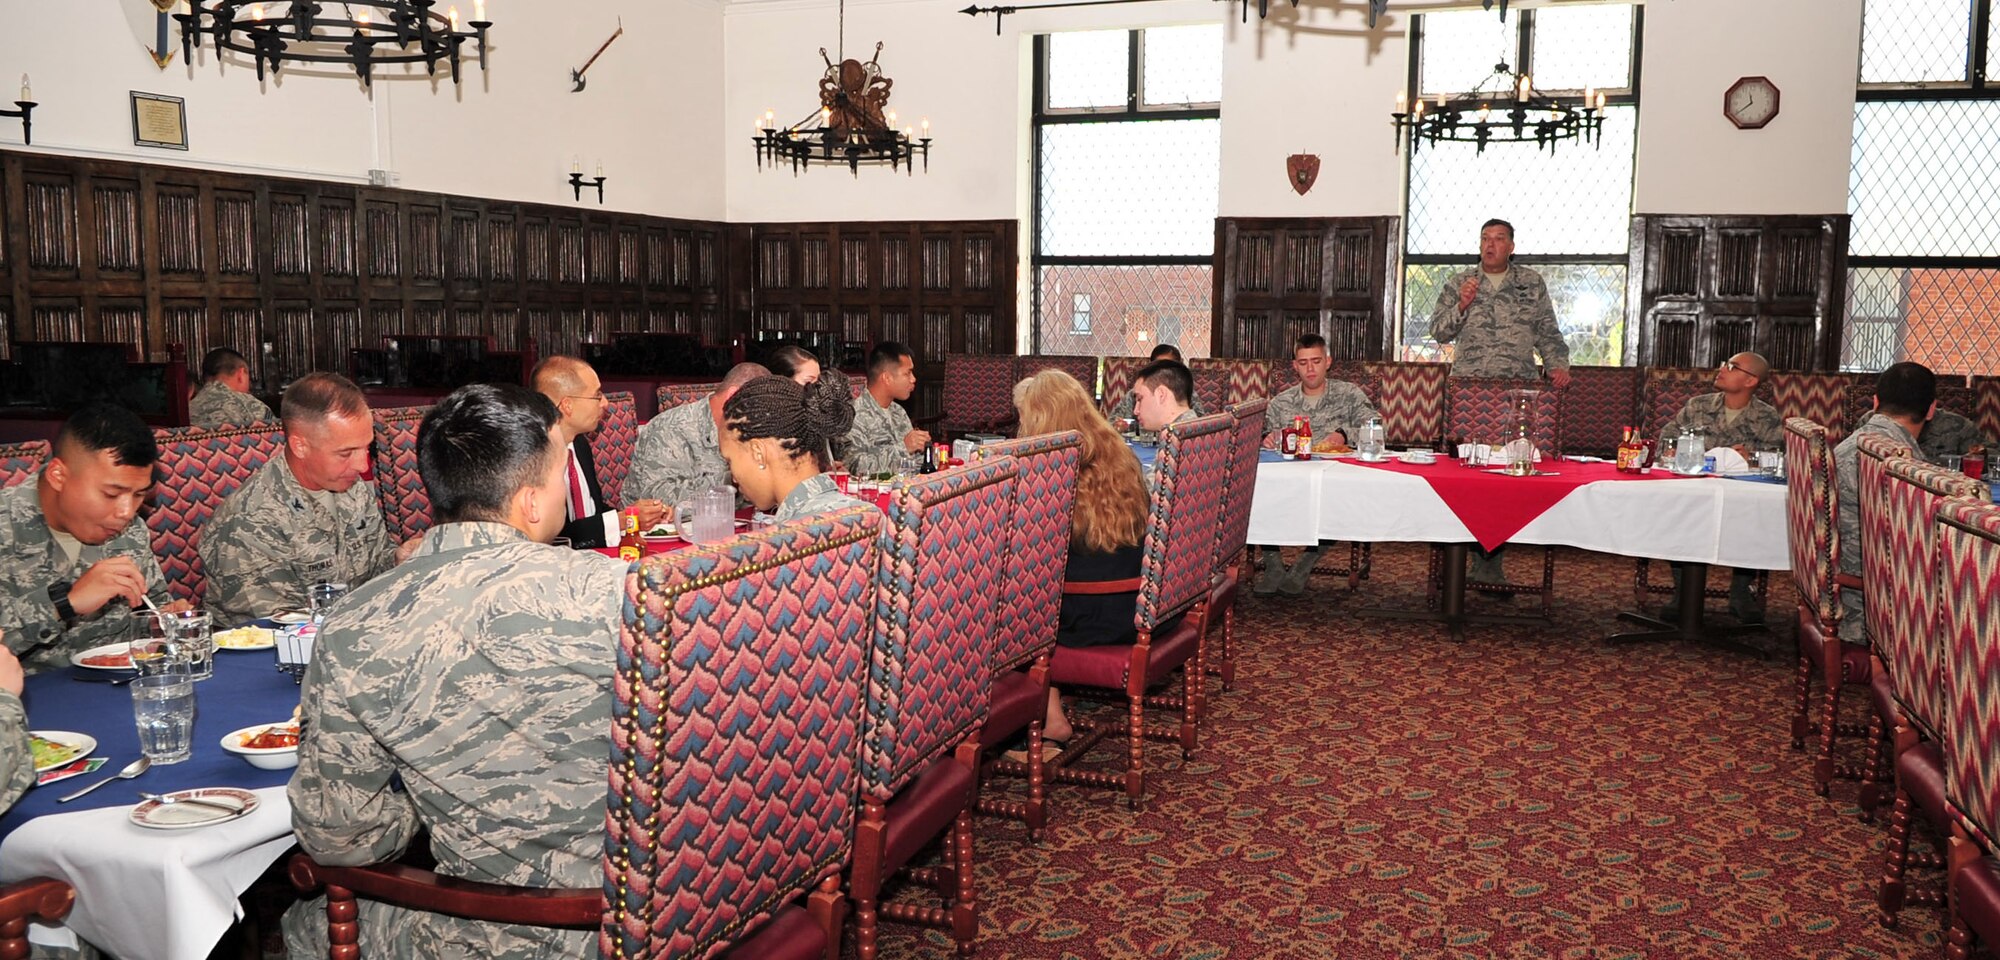 Lt. Gen. Bradley A. Heithold, standing, Air Force Special Operations Command commander, speaks with Airmen during a luncheon at the Gateway Dining Facility, Oct. 27, 2014, on RAF Mildenhall, England. Heithold visited Air Commandos at various units to discuss the AFSOC mission and to ensure morale is at its highest. (U.S. Air Force photo by Senior Airman Christine Griffiths)